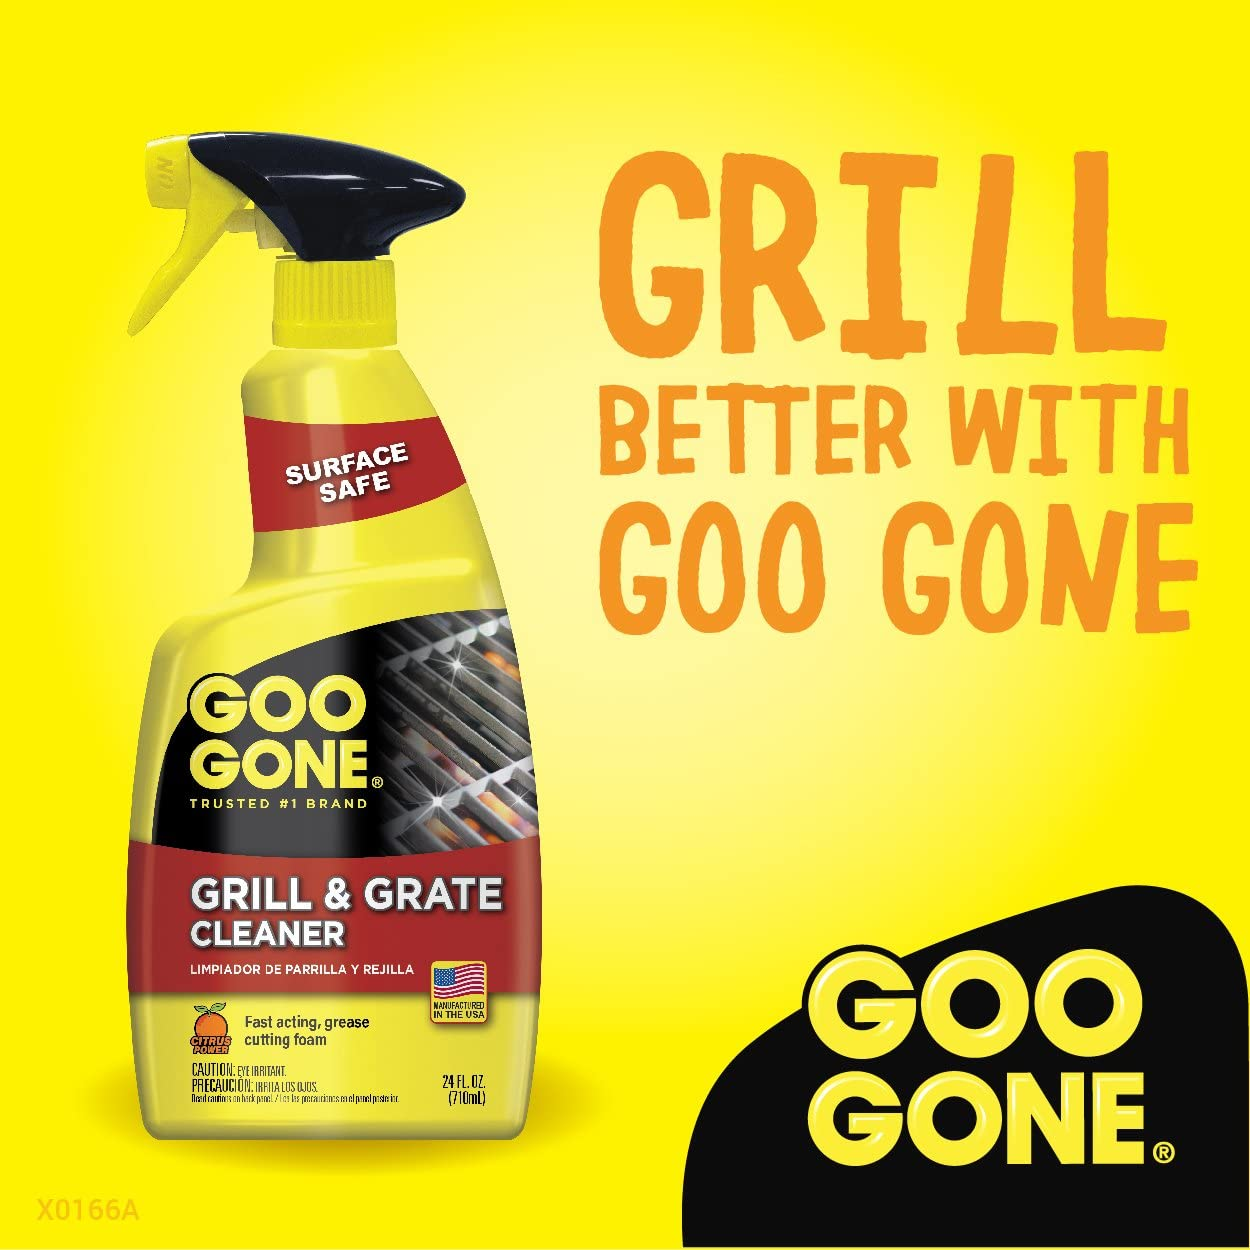 Grill and Grate Cleaner Spray (2 Pack) Cleans and Degreases BBQ Cooking Grates and Racks, Pellet and Electric Smokers- 24 Ounce